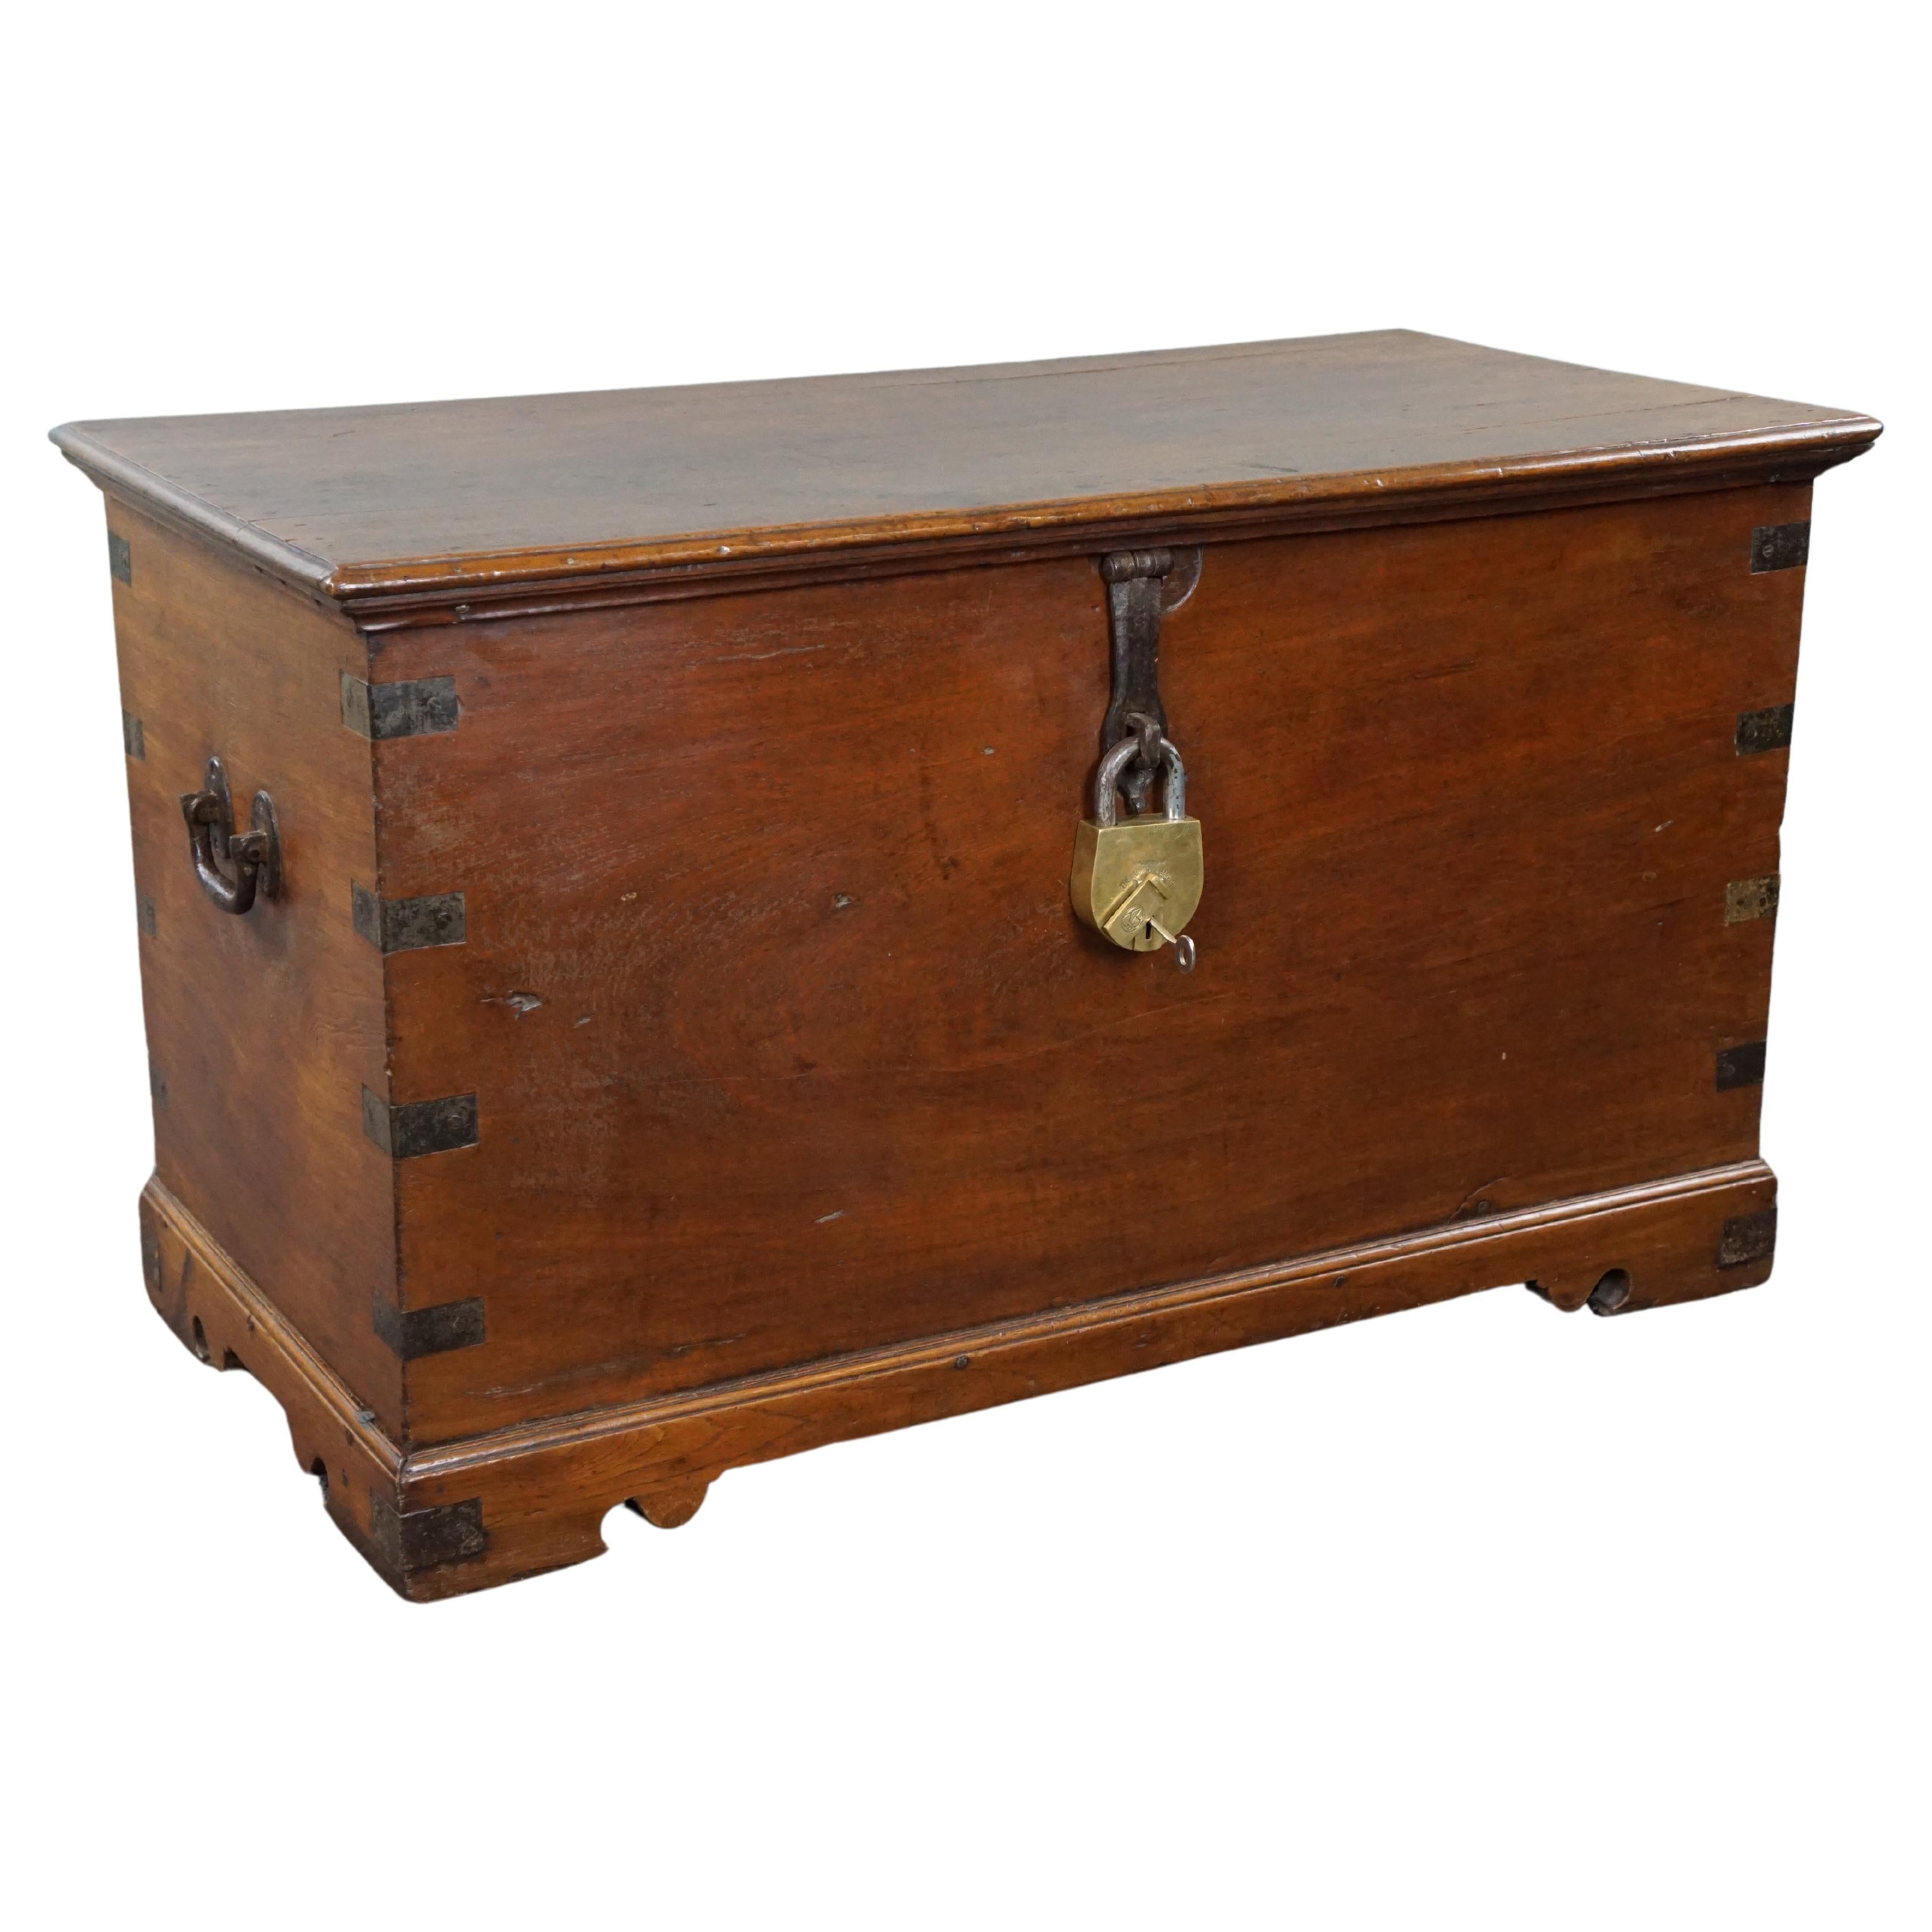 Large English colonial chest from the 18th century complete with padlock